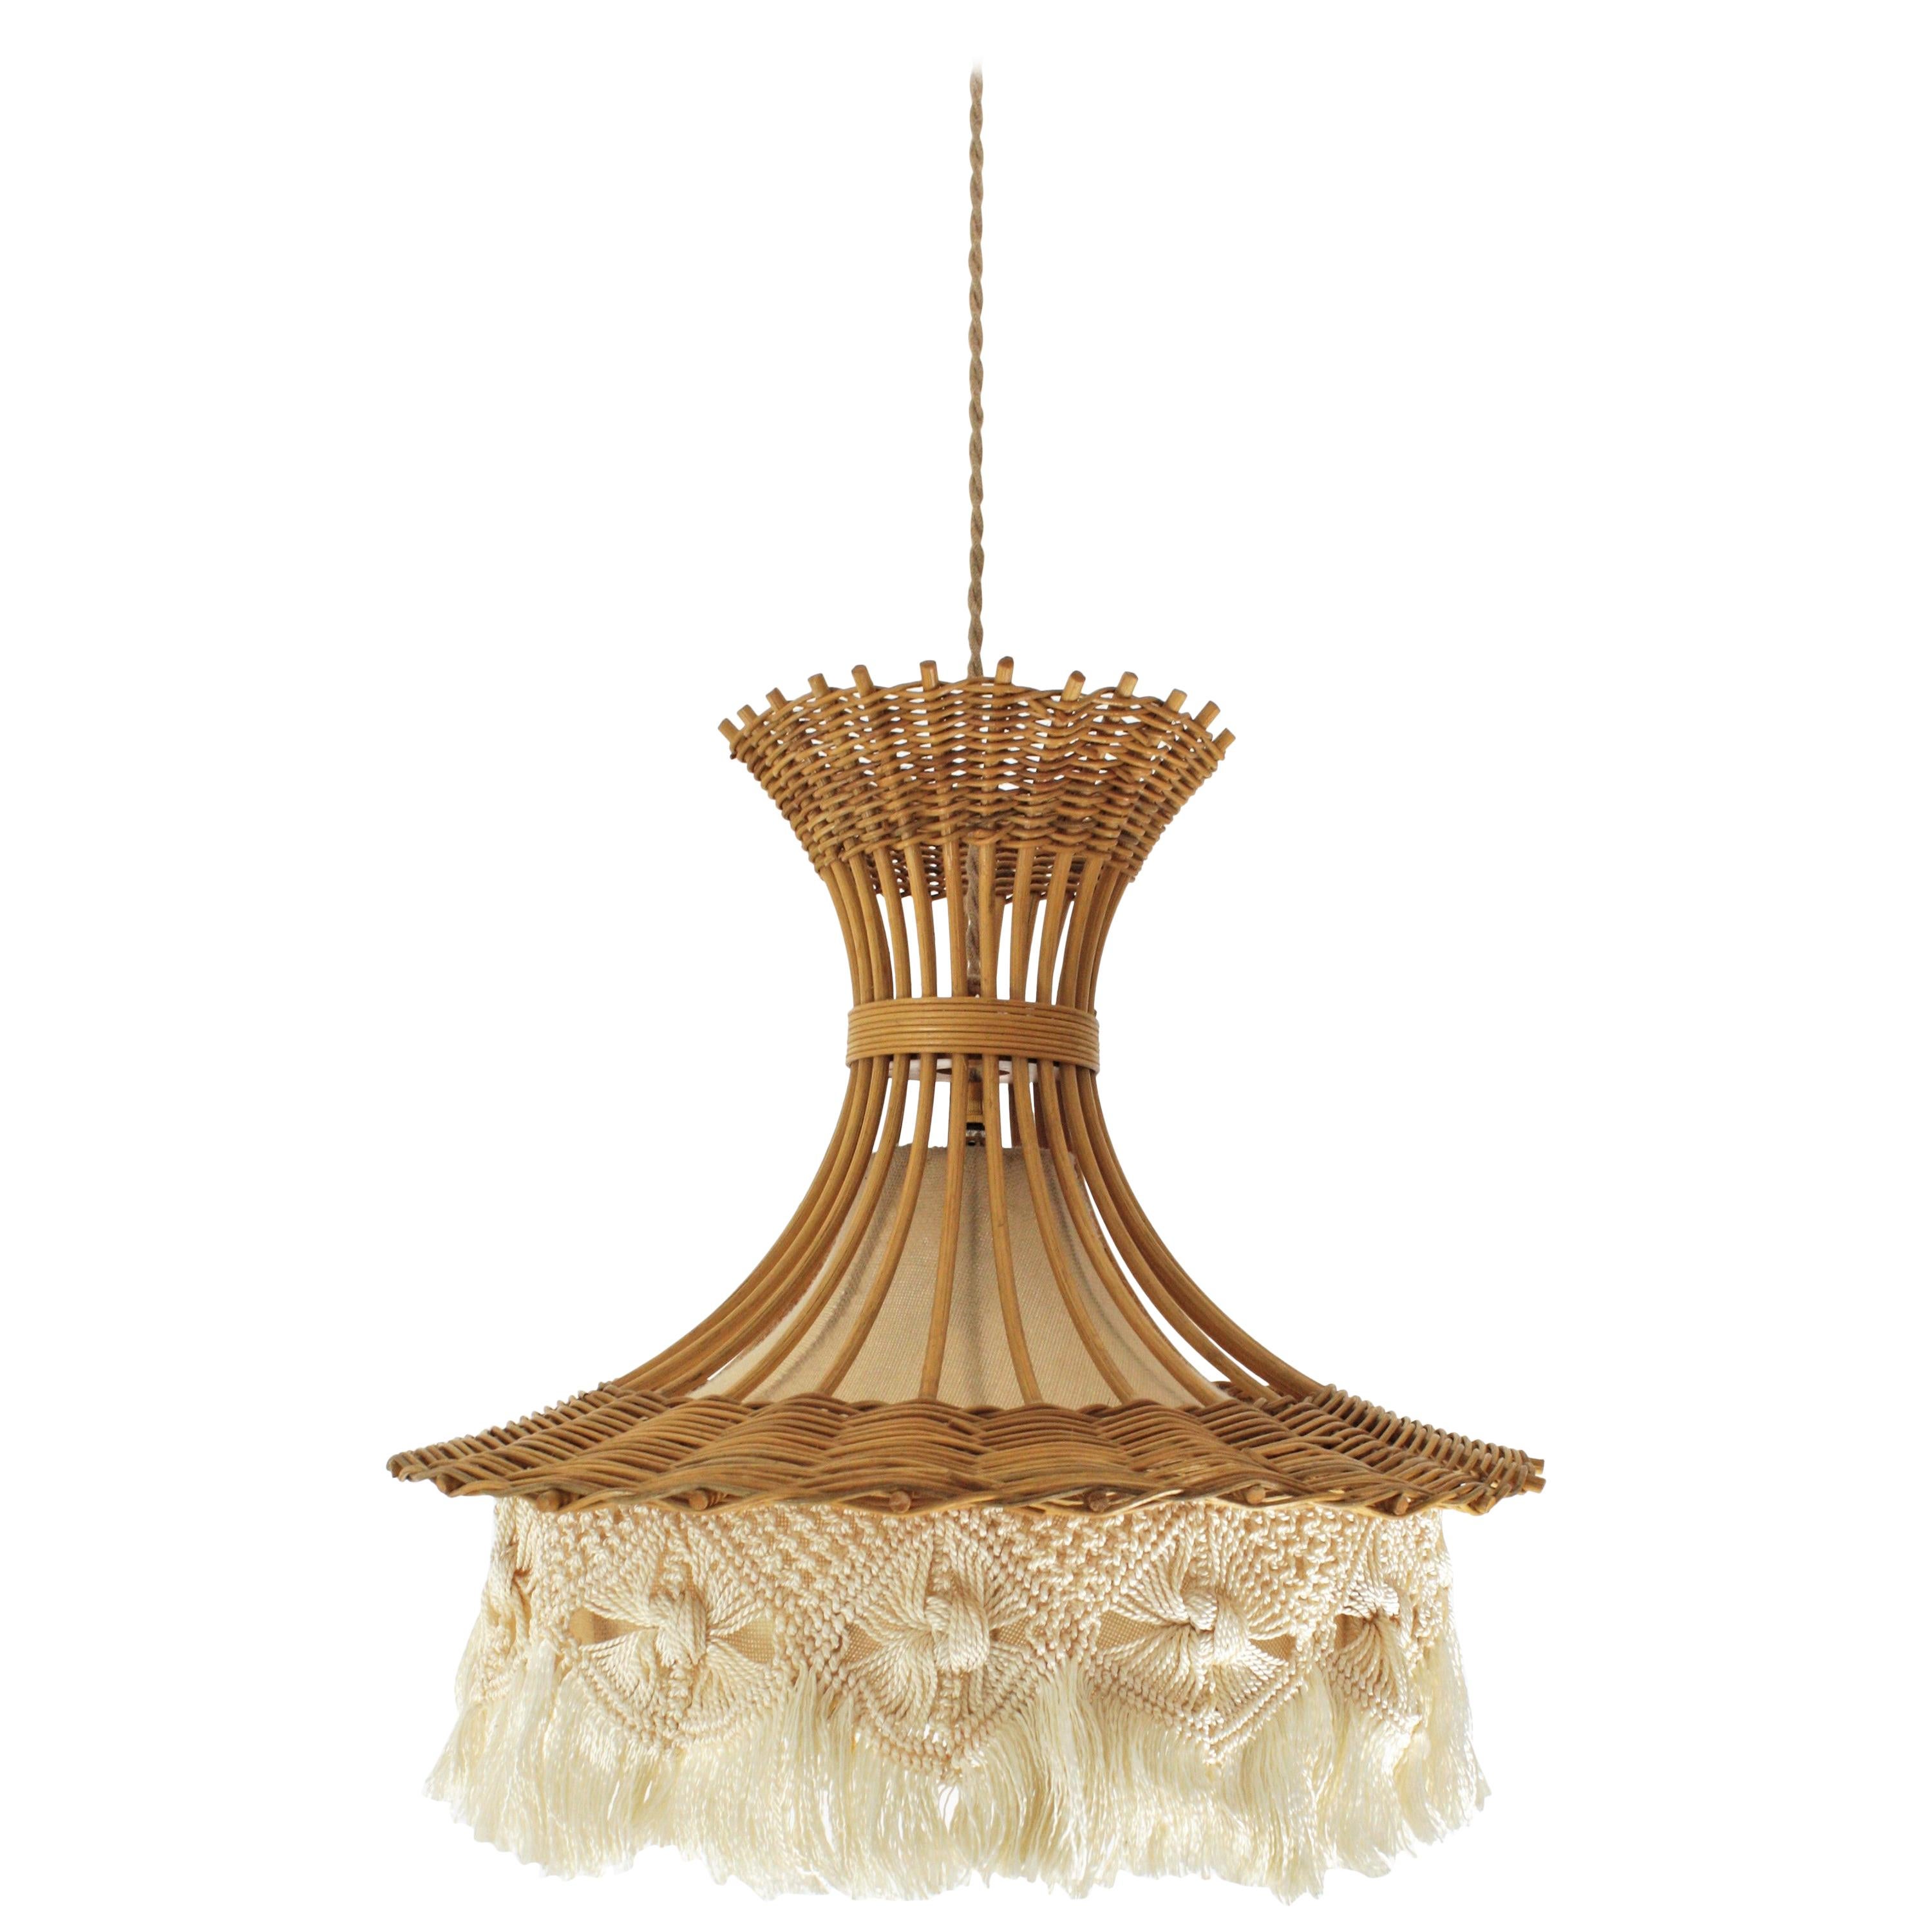 French Rattan and Macrame Large Pendant Lamp / Hanging Light with Fringe